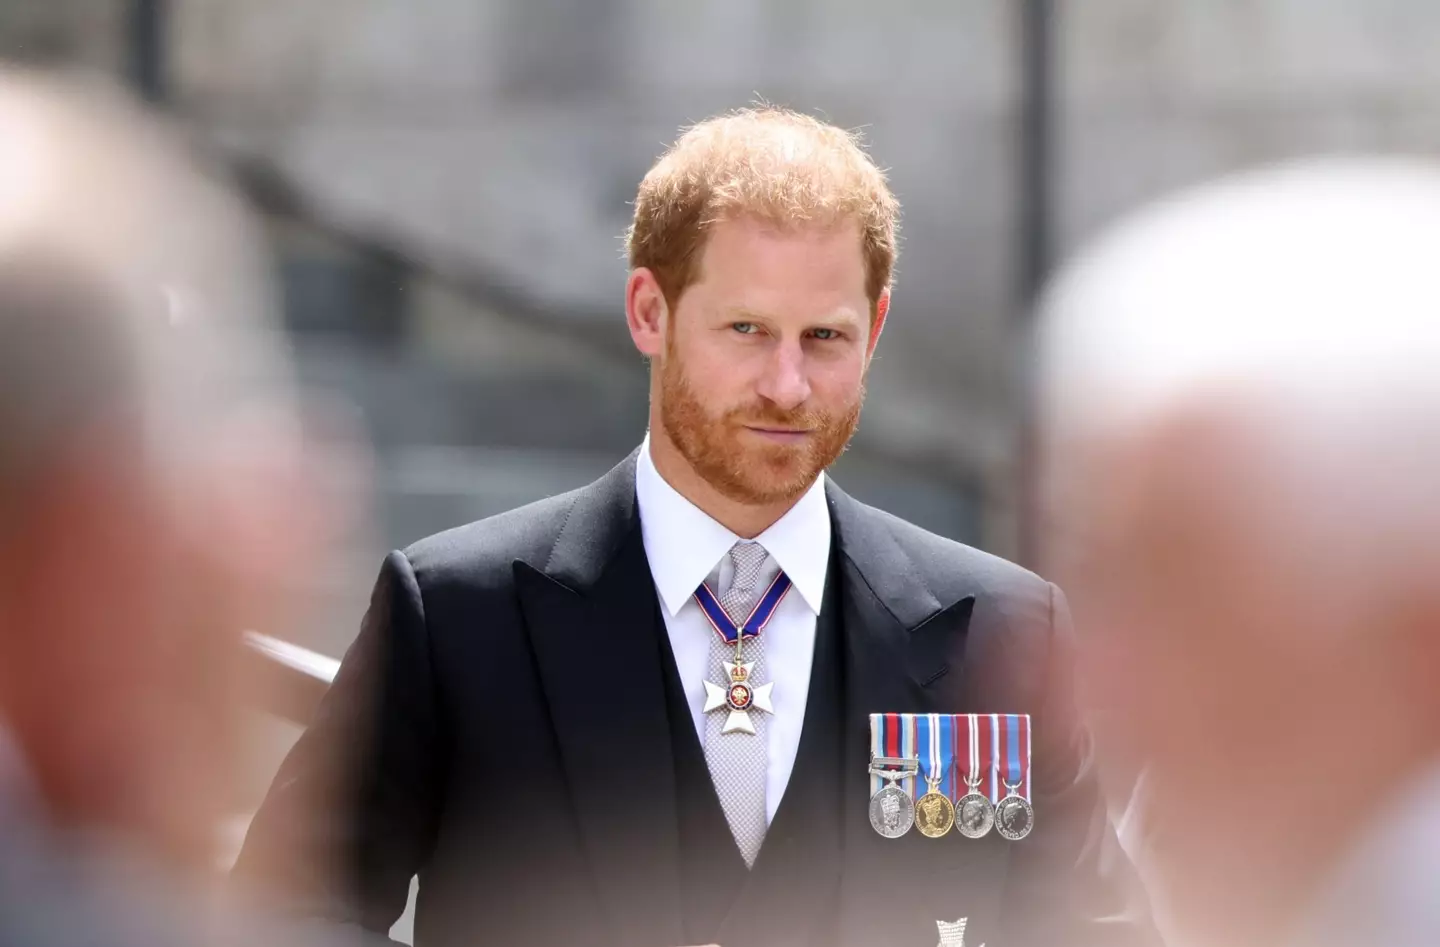 Prince Harry admitted it was one of the biggest mistakes of his life.